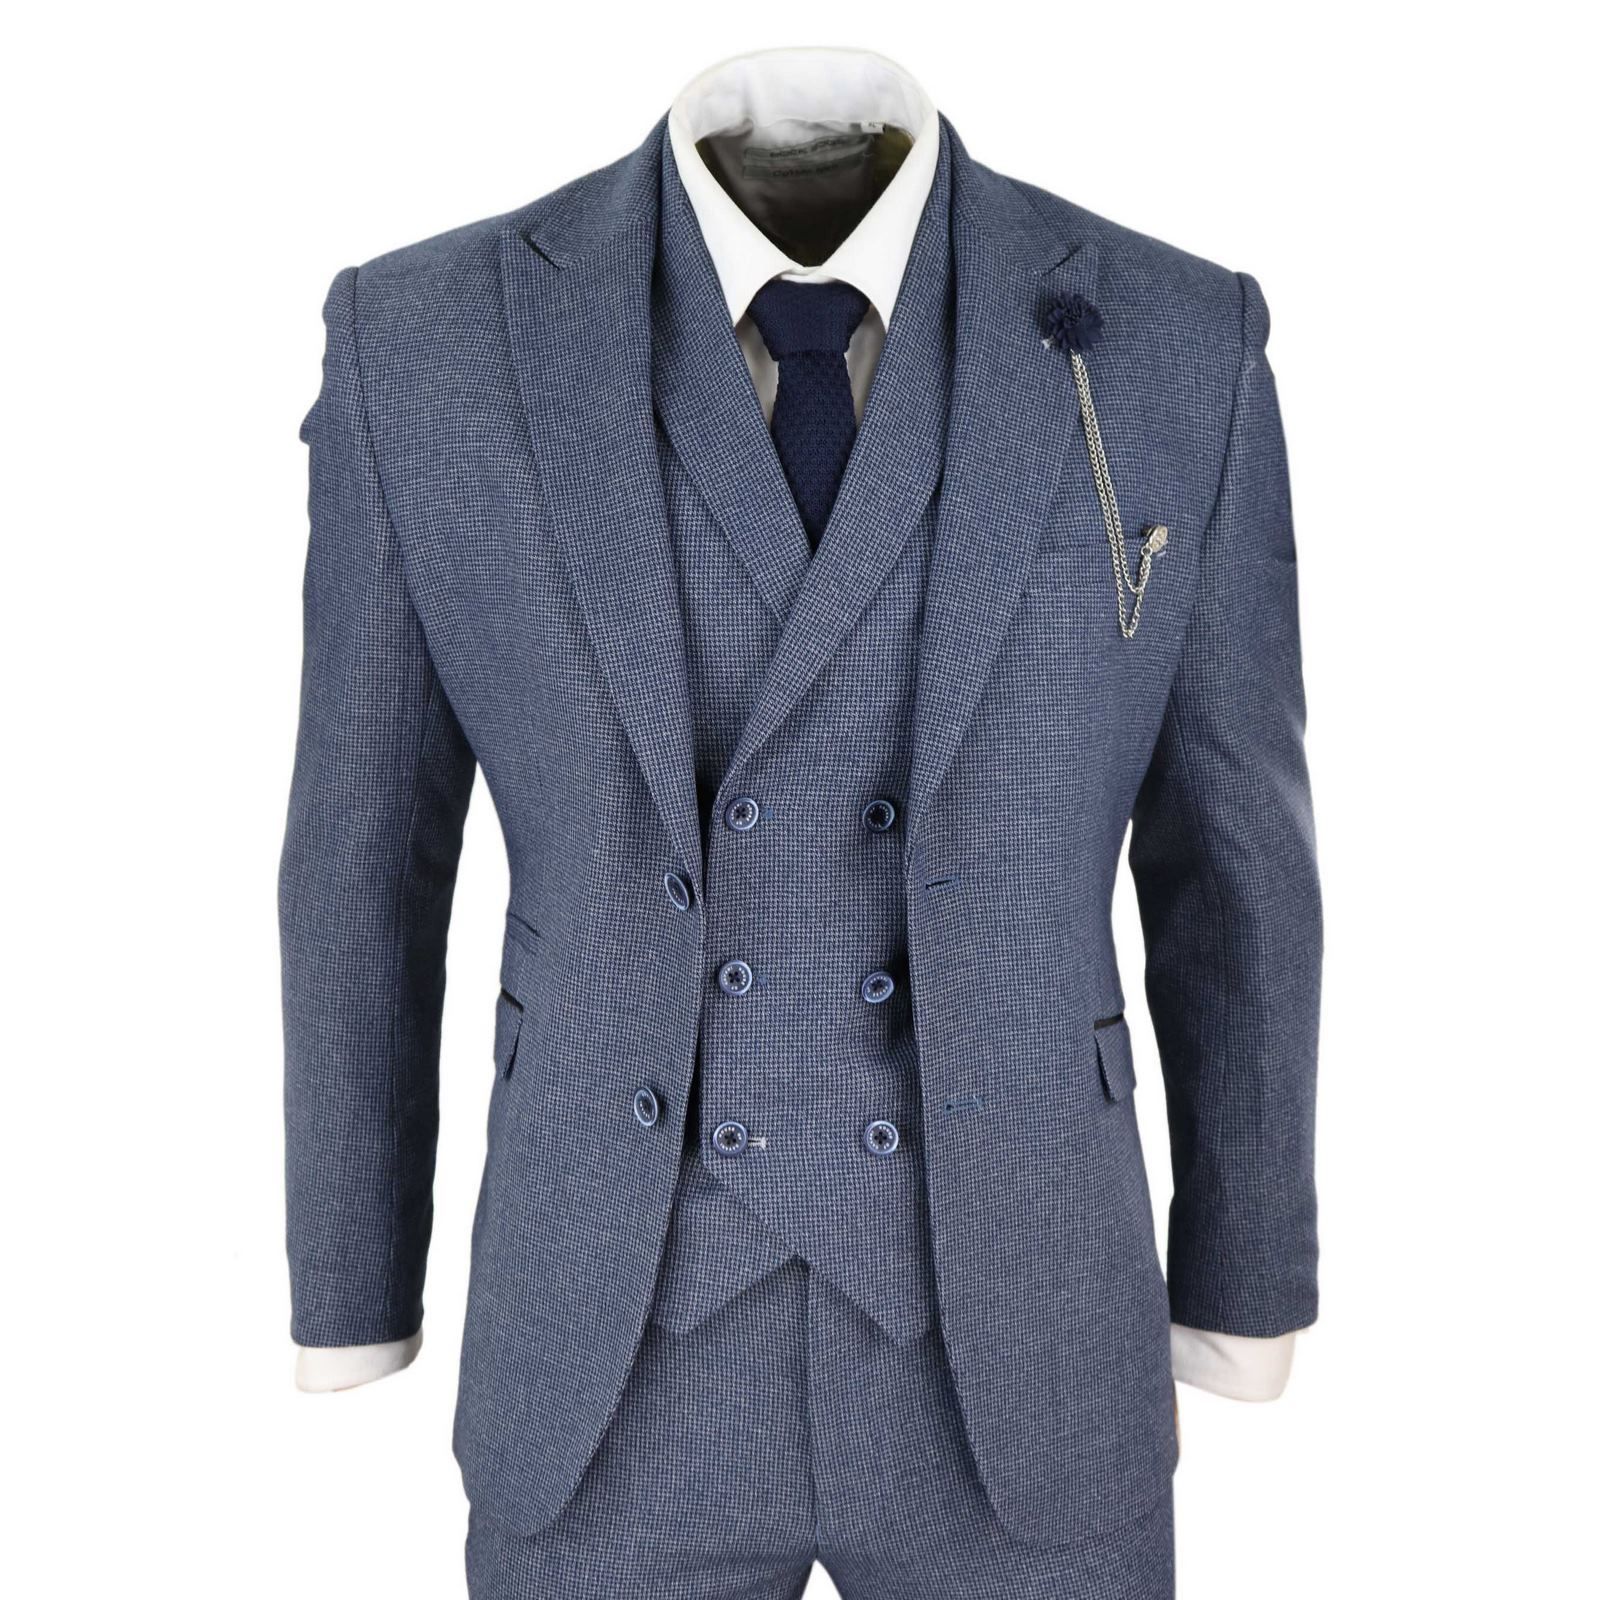 Mens Blue 3 Piece Suit with Double Breasted Waistcoat | Happy Gentleman